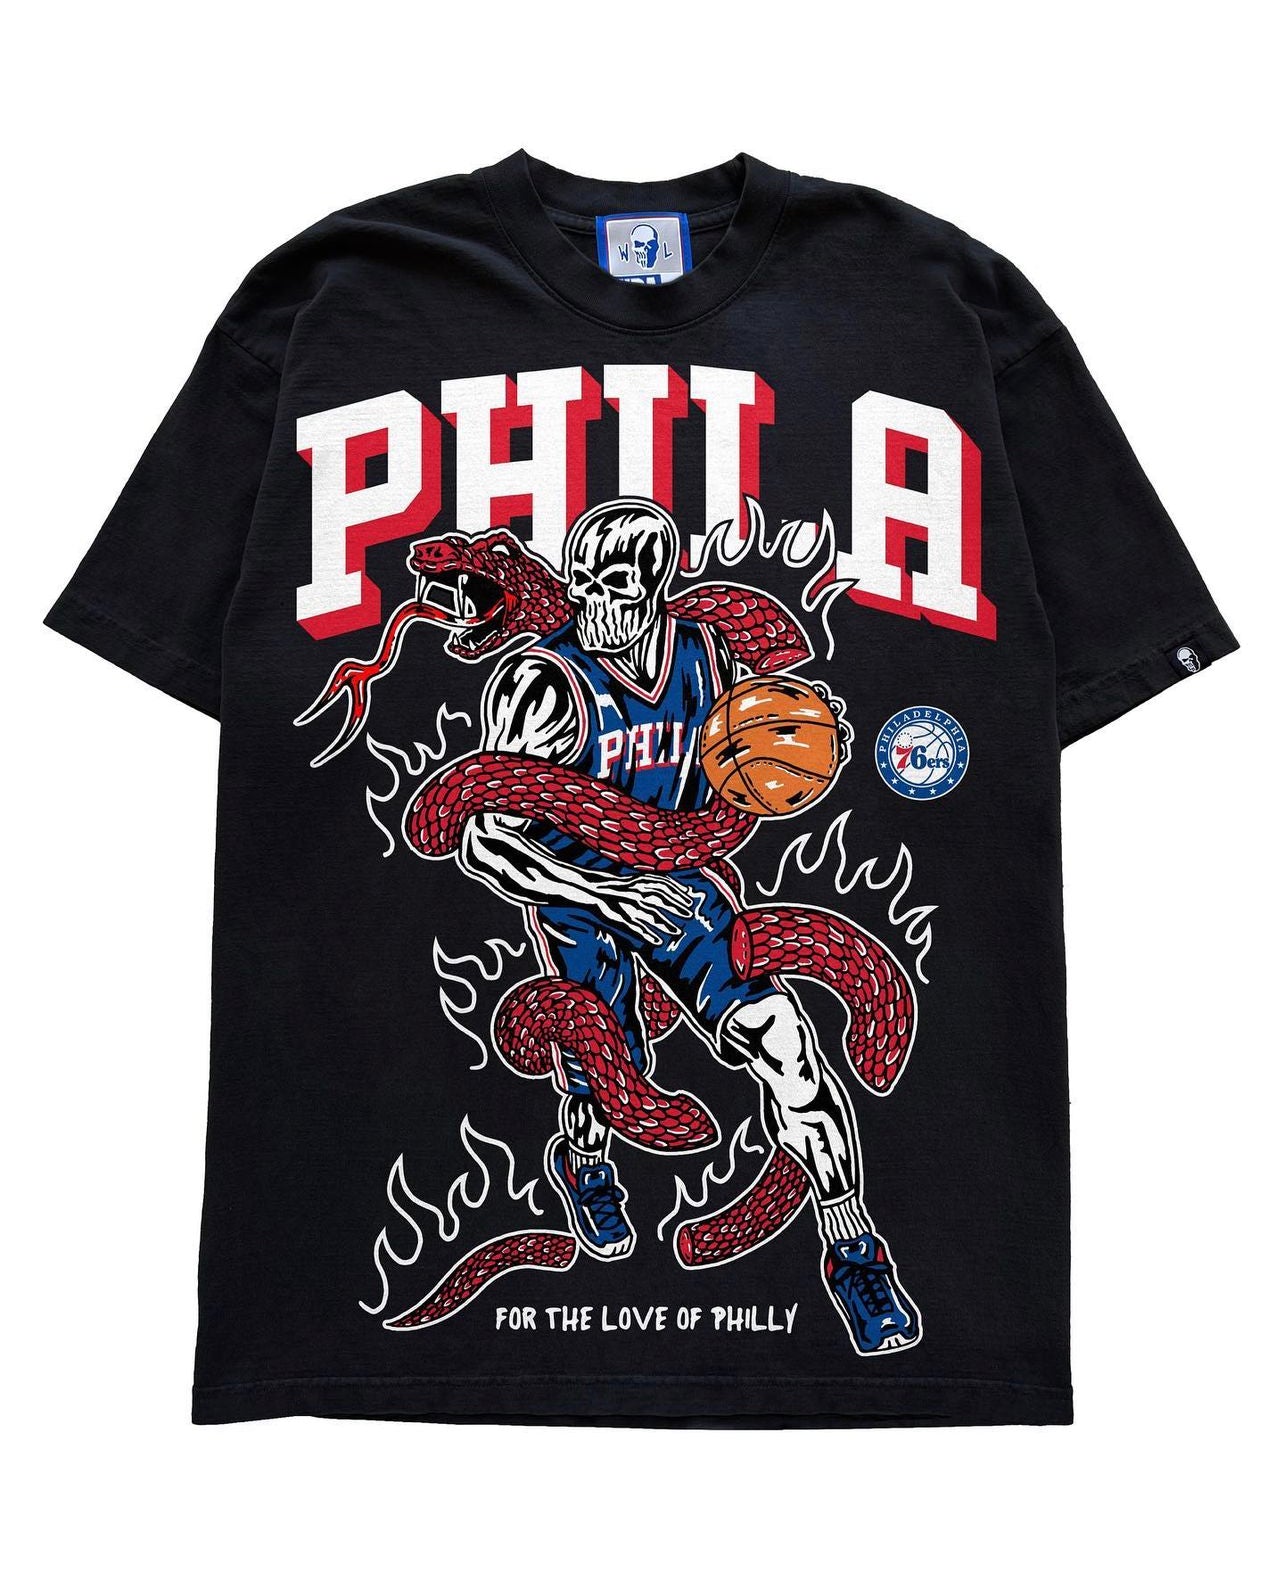 NBA x Warren Lotas "For the Love of Philly"